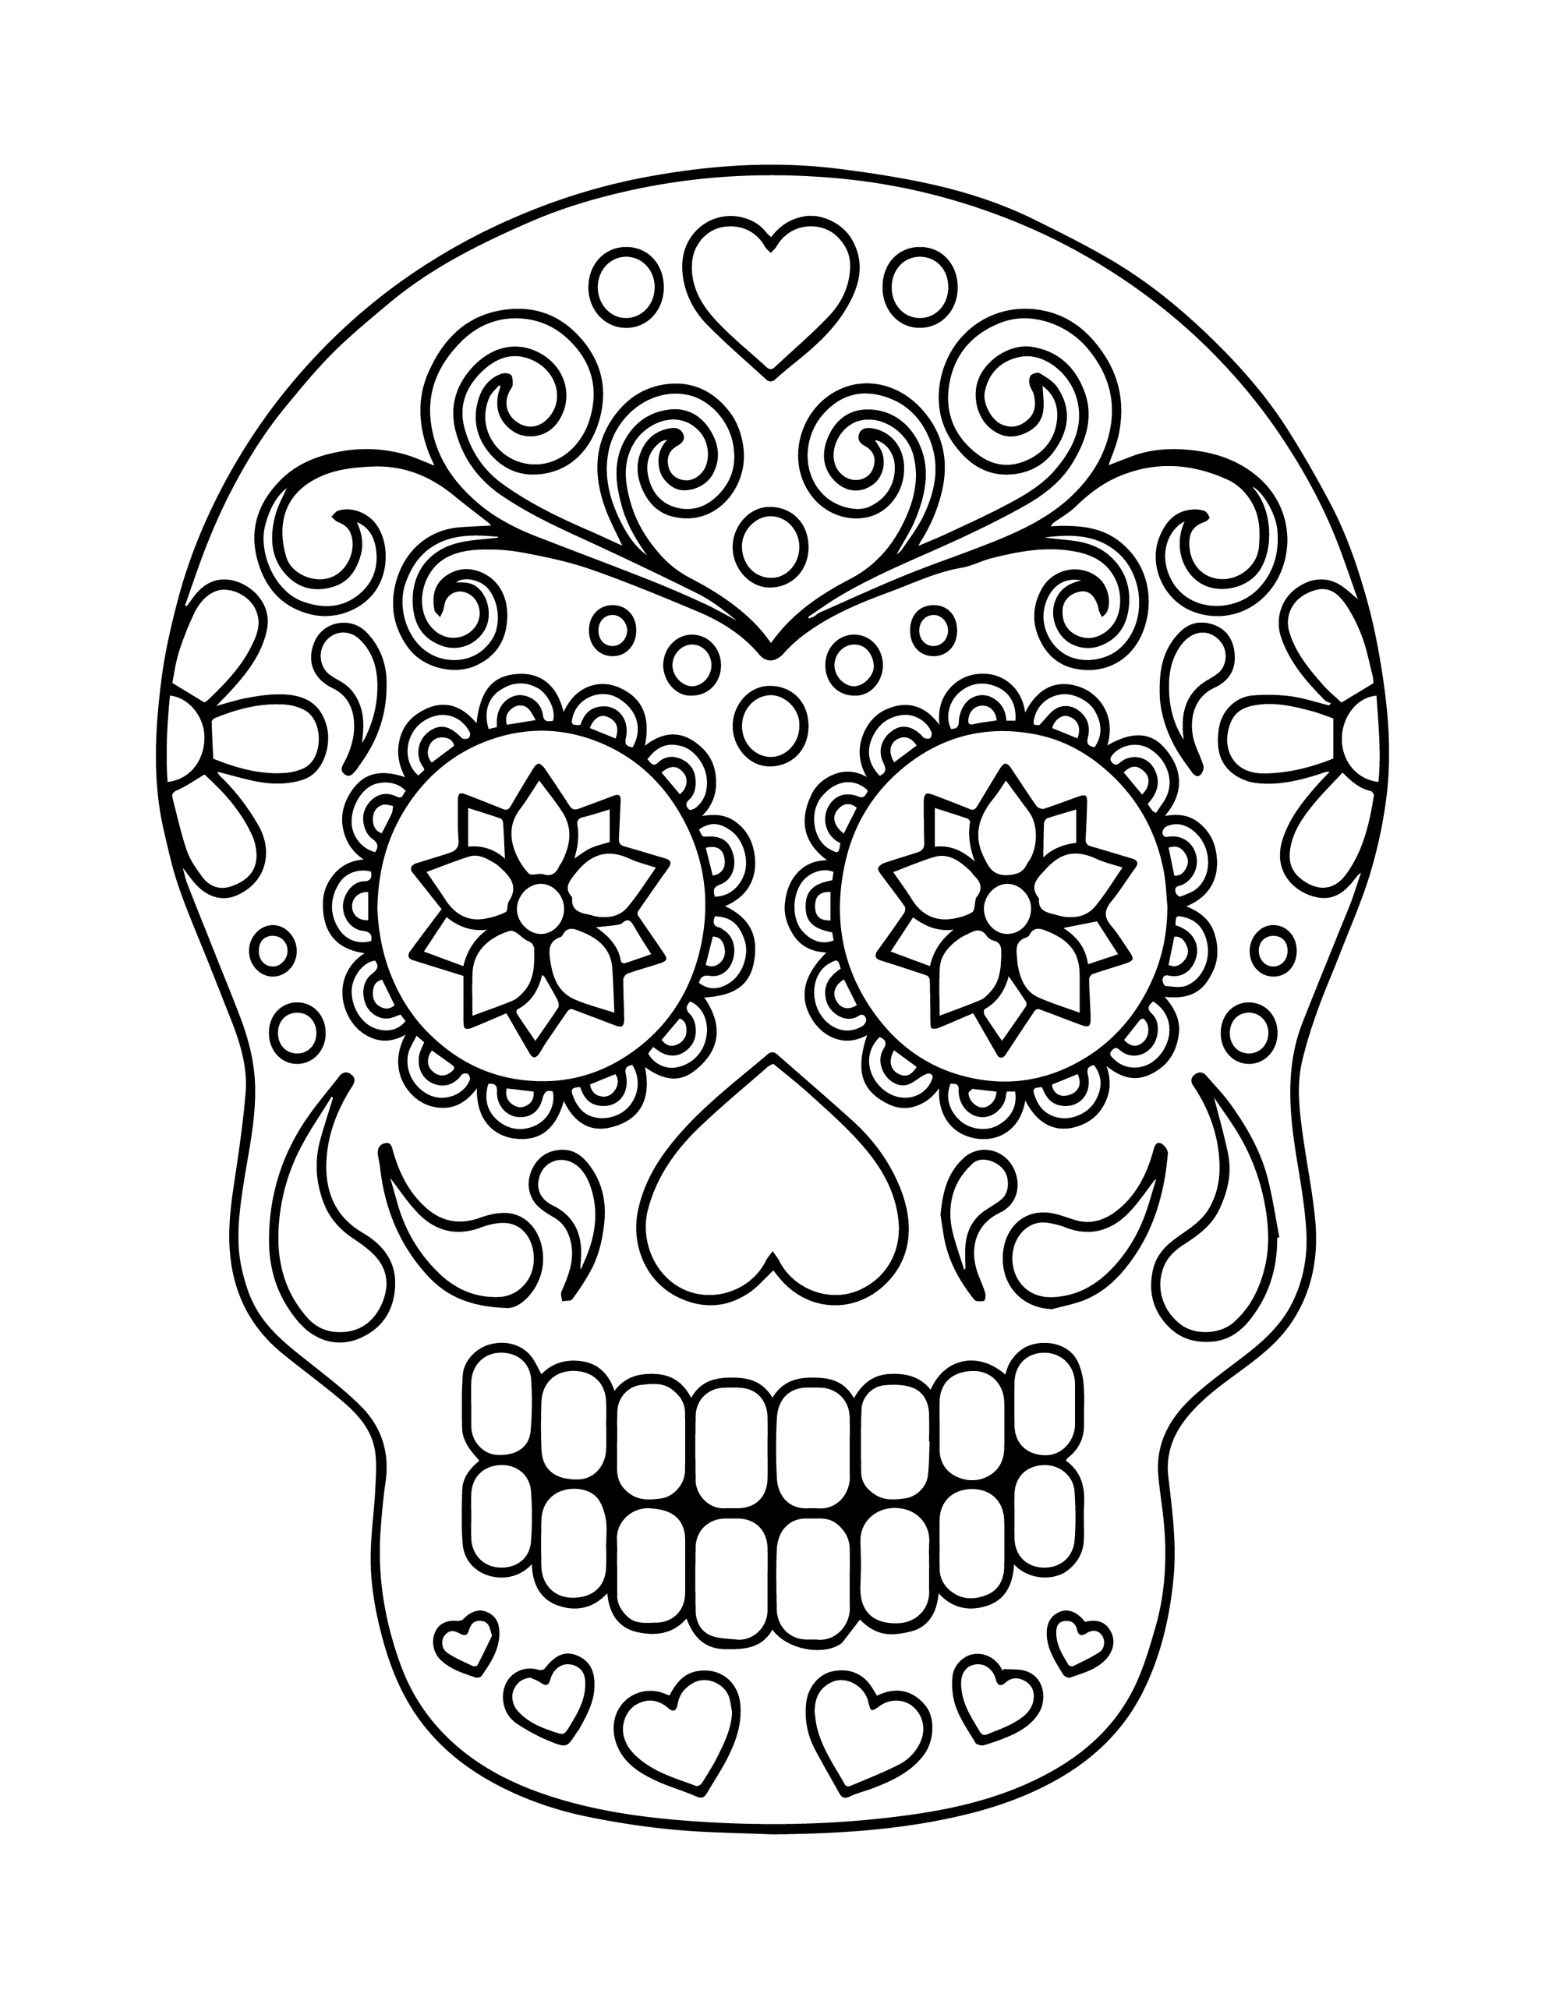 Day of the dead coloring pages